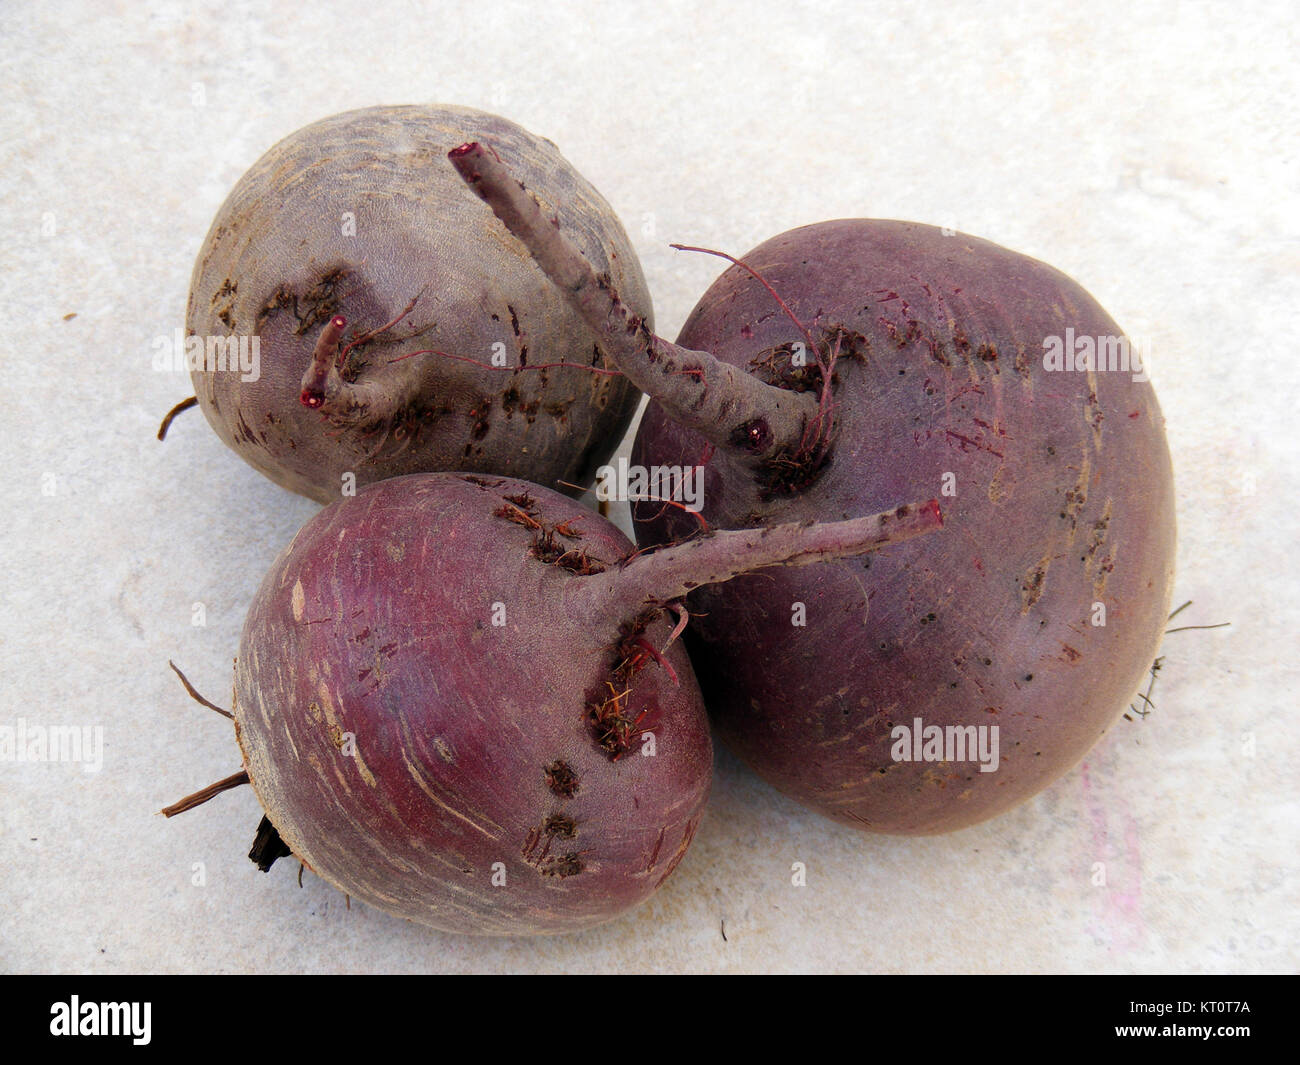 Red beet pictures Stock Photo